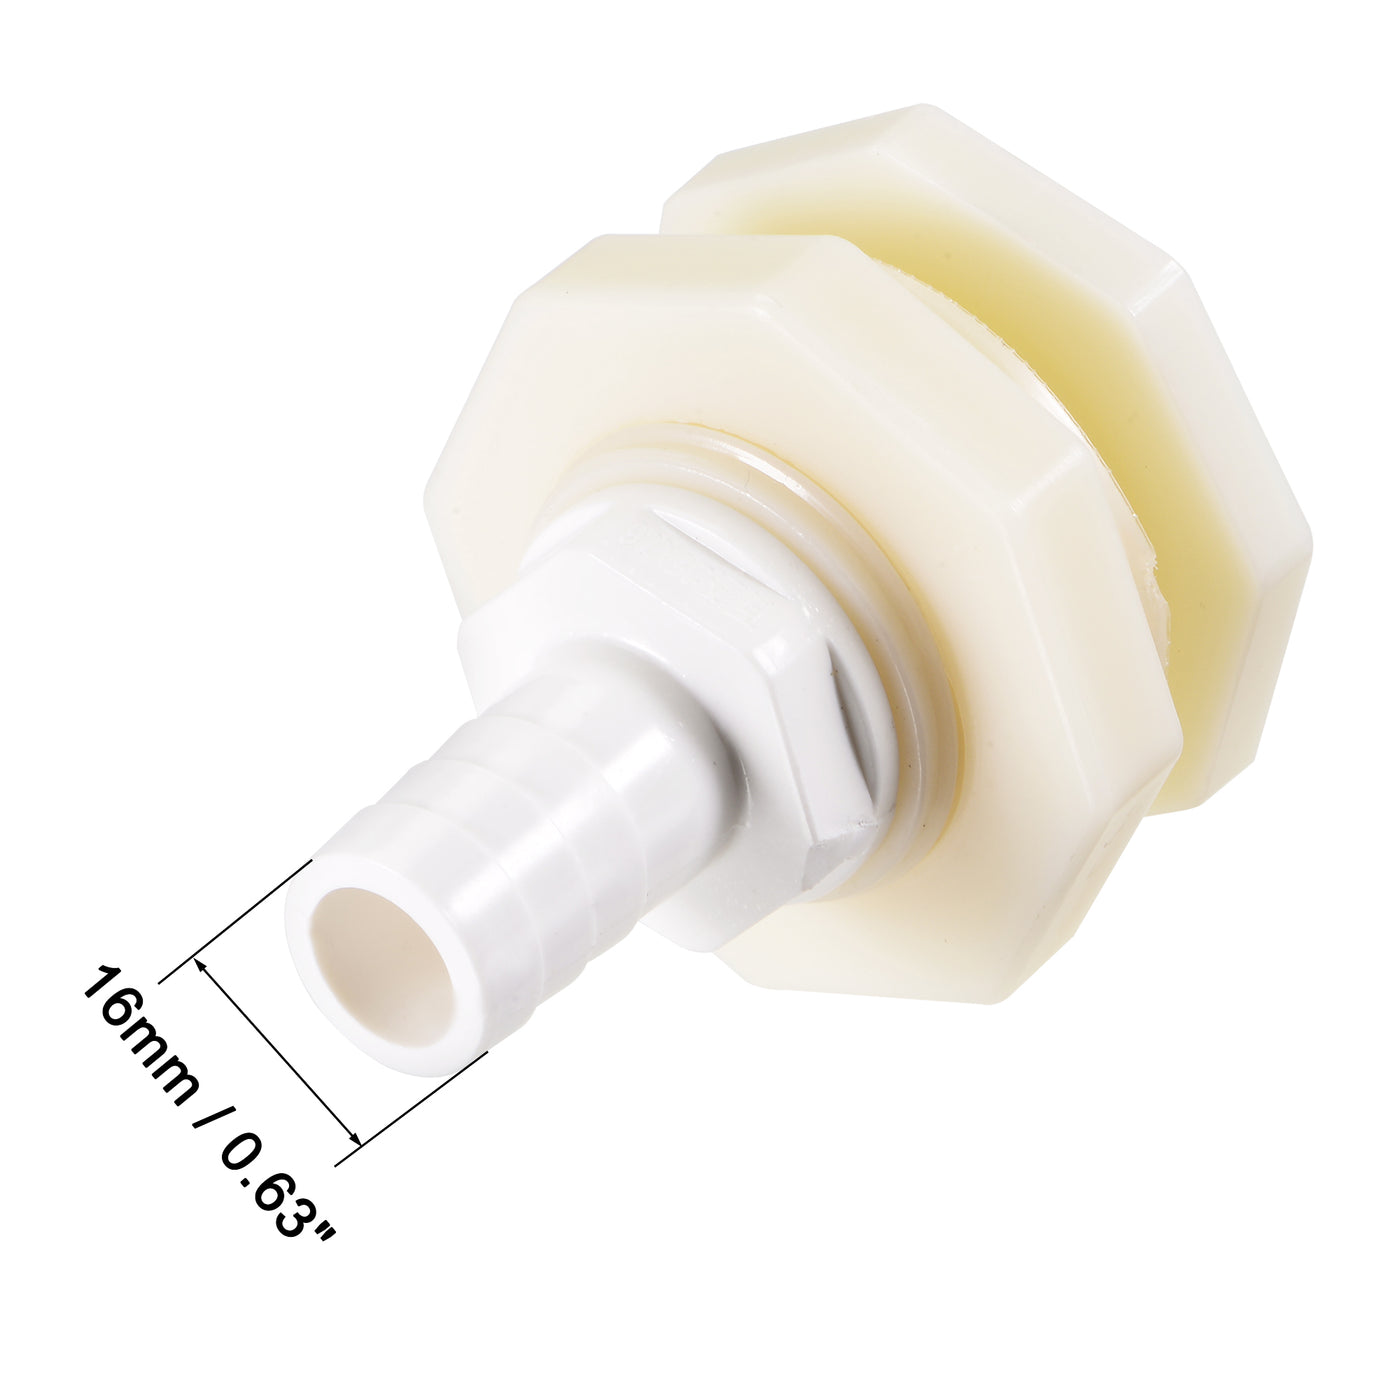 uxcell Uxcell Bulkhead Fitting Adapter 16mm Barbed x G3/4 Female ABS White for Aquariums, Water Tanks, Tubs, Pools 2Pcs